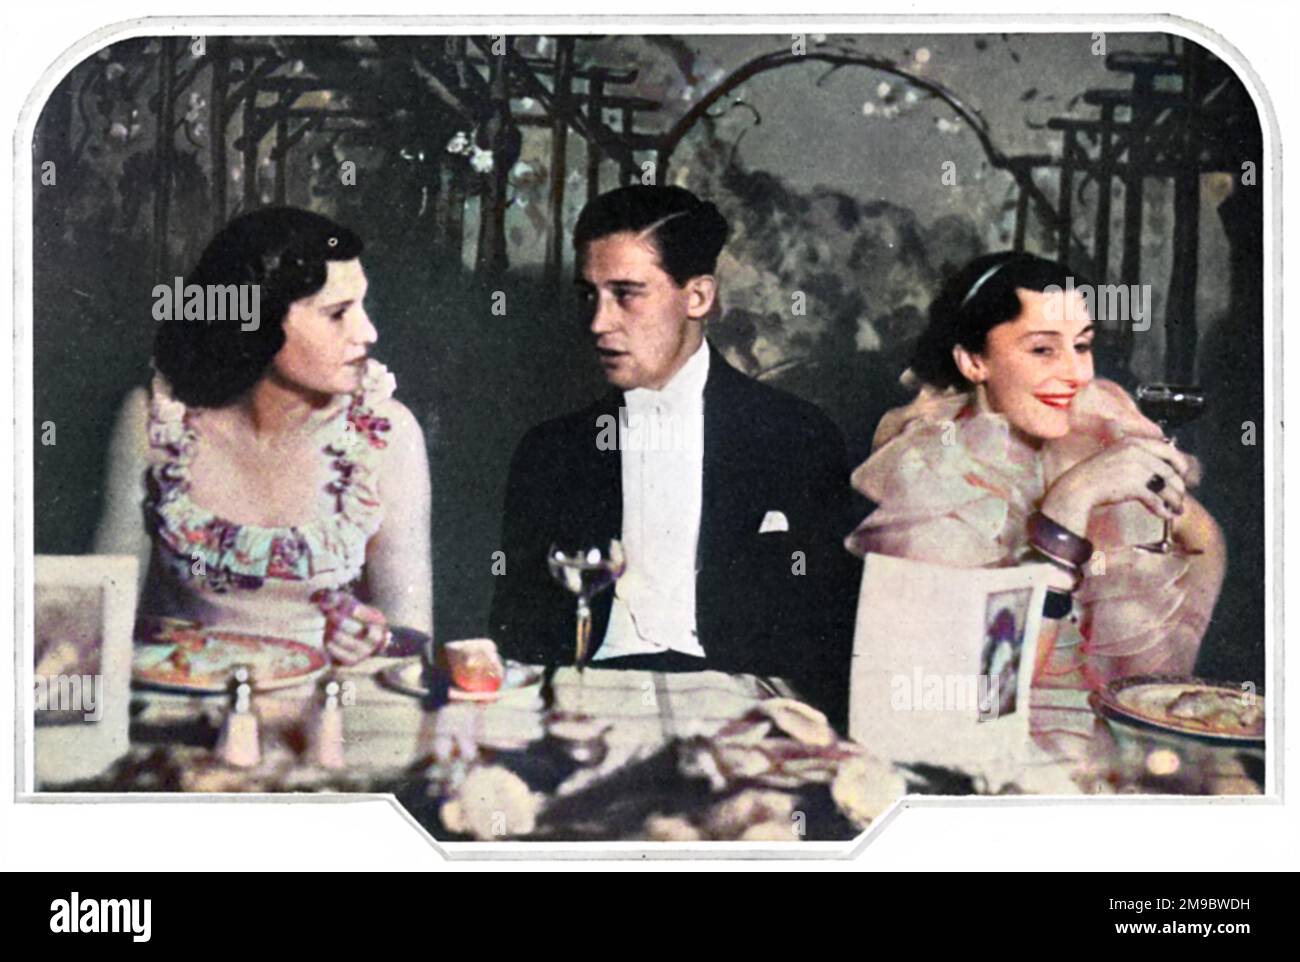 Roger Bushell at a dinner to celebrate the foundation of the Vintage Club, established to teach people to appreciate fine wine. To the left is Miss Livia Paravicini and to the right Miss Violet Voules. Bushell would later join the RAF and following capture in 1940, later became the mastermind behind the 'Great Escape' attempt from Stalag Luft III at Sagan. Stock Photo